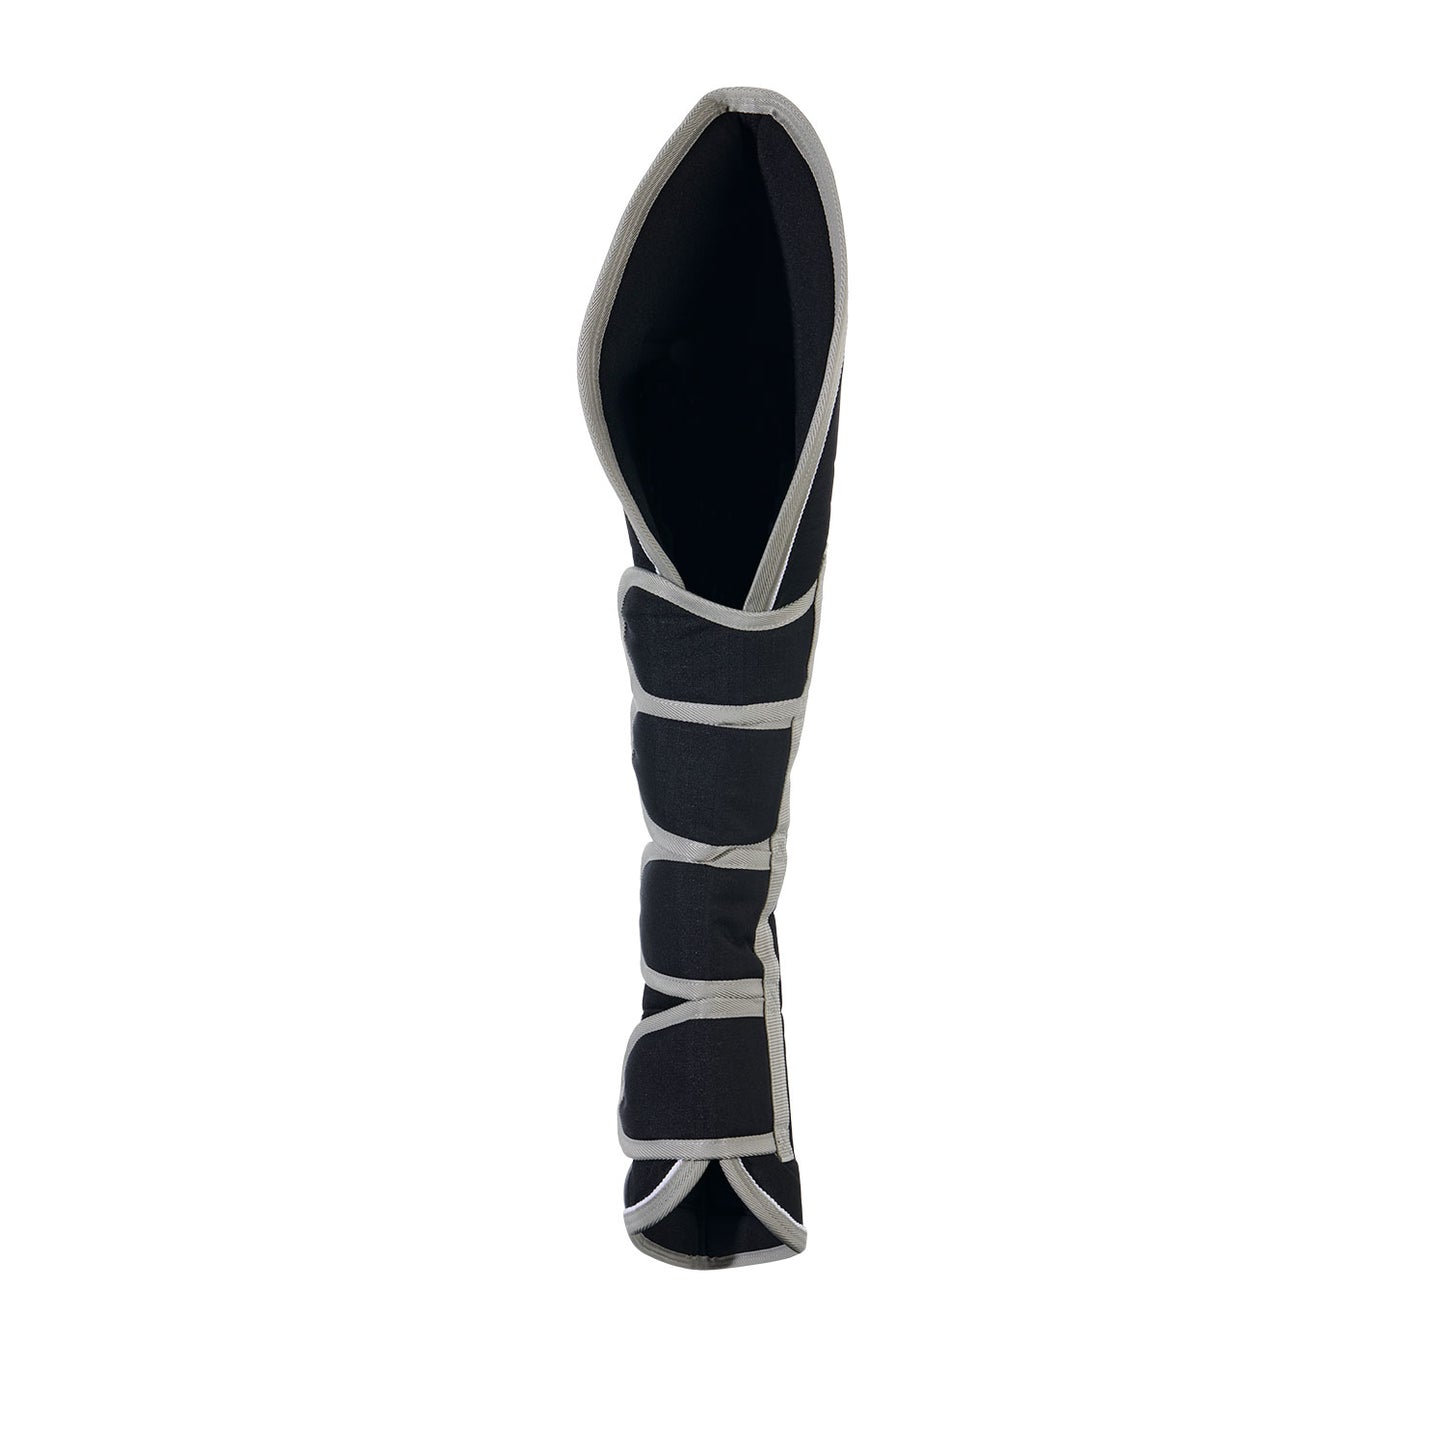 EQUESTRO - Travelling Boots Set and Tail Guard